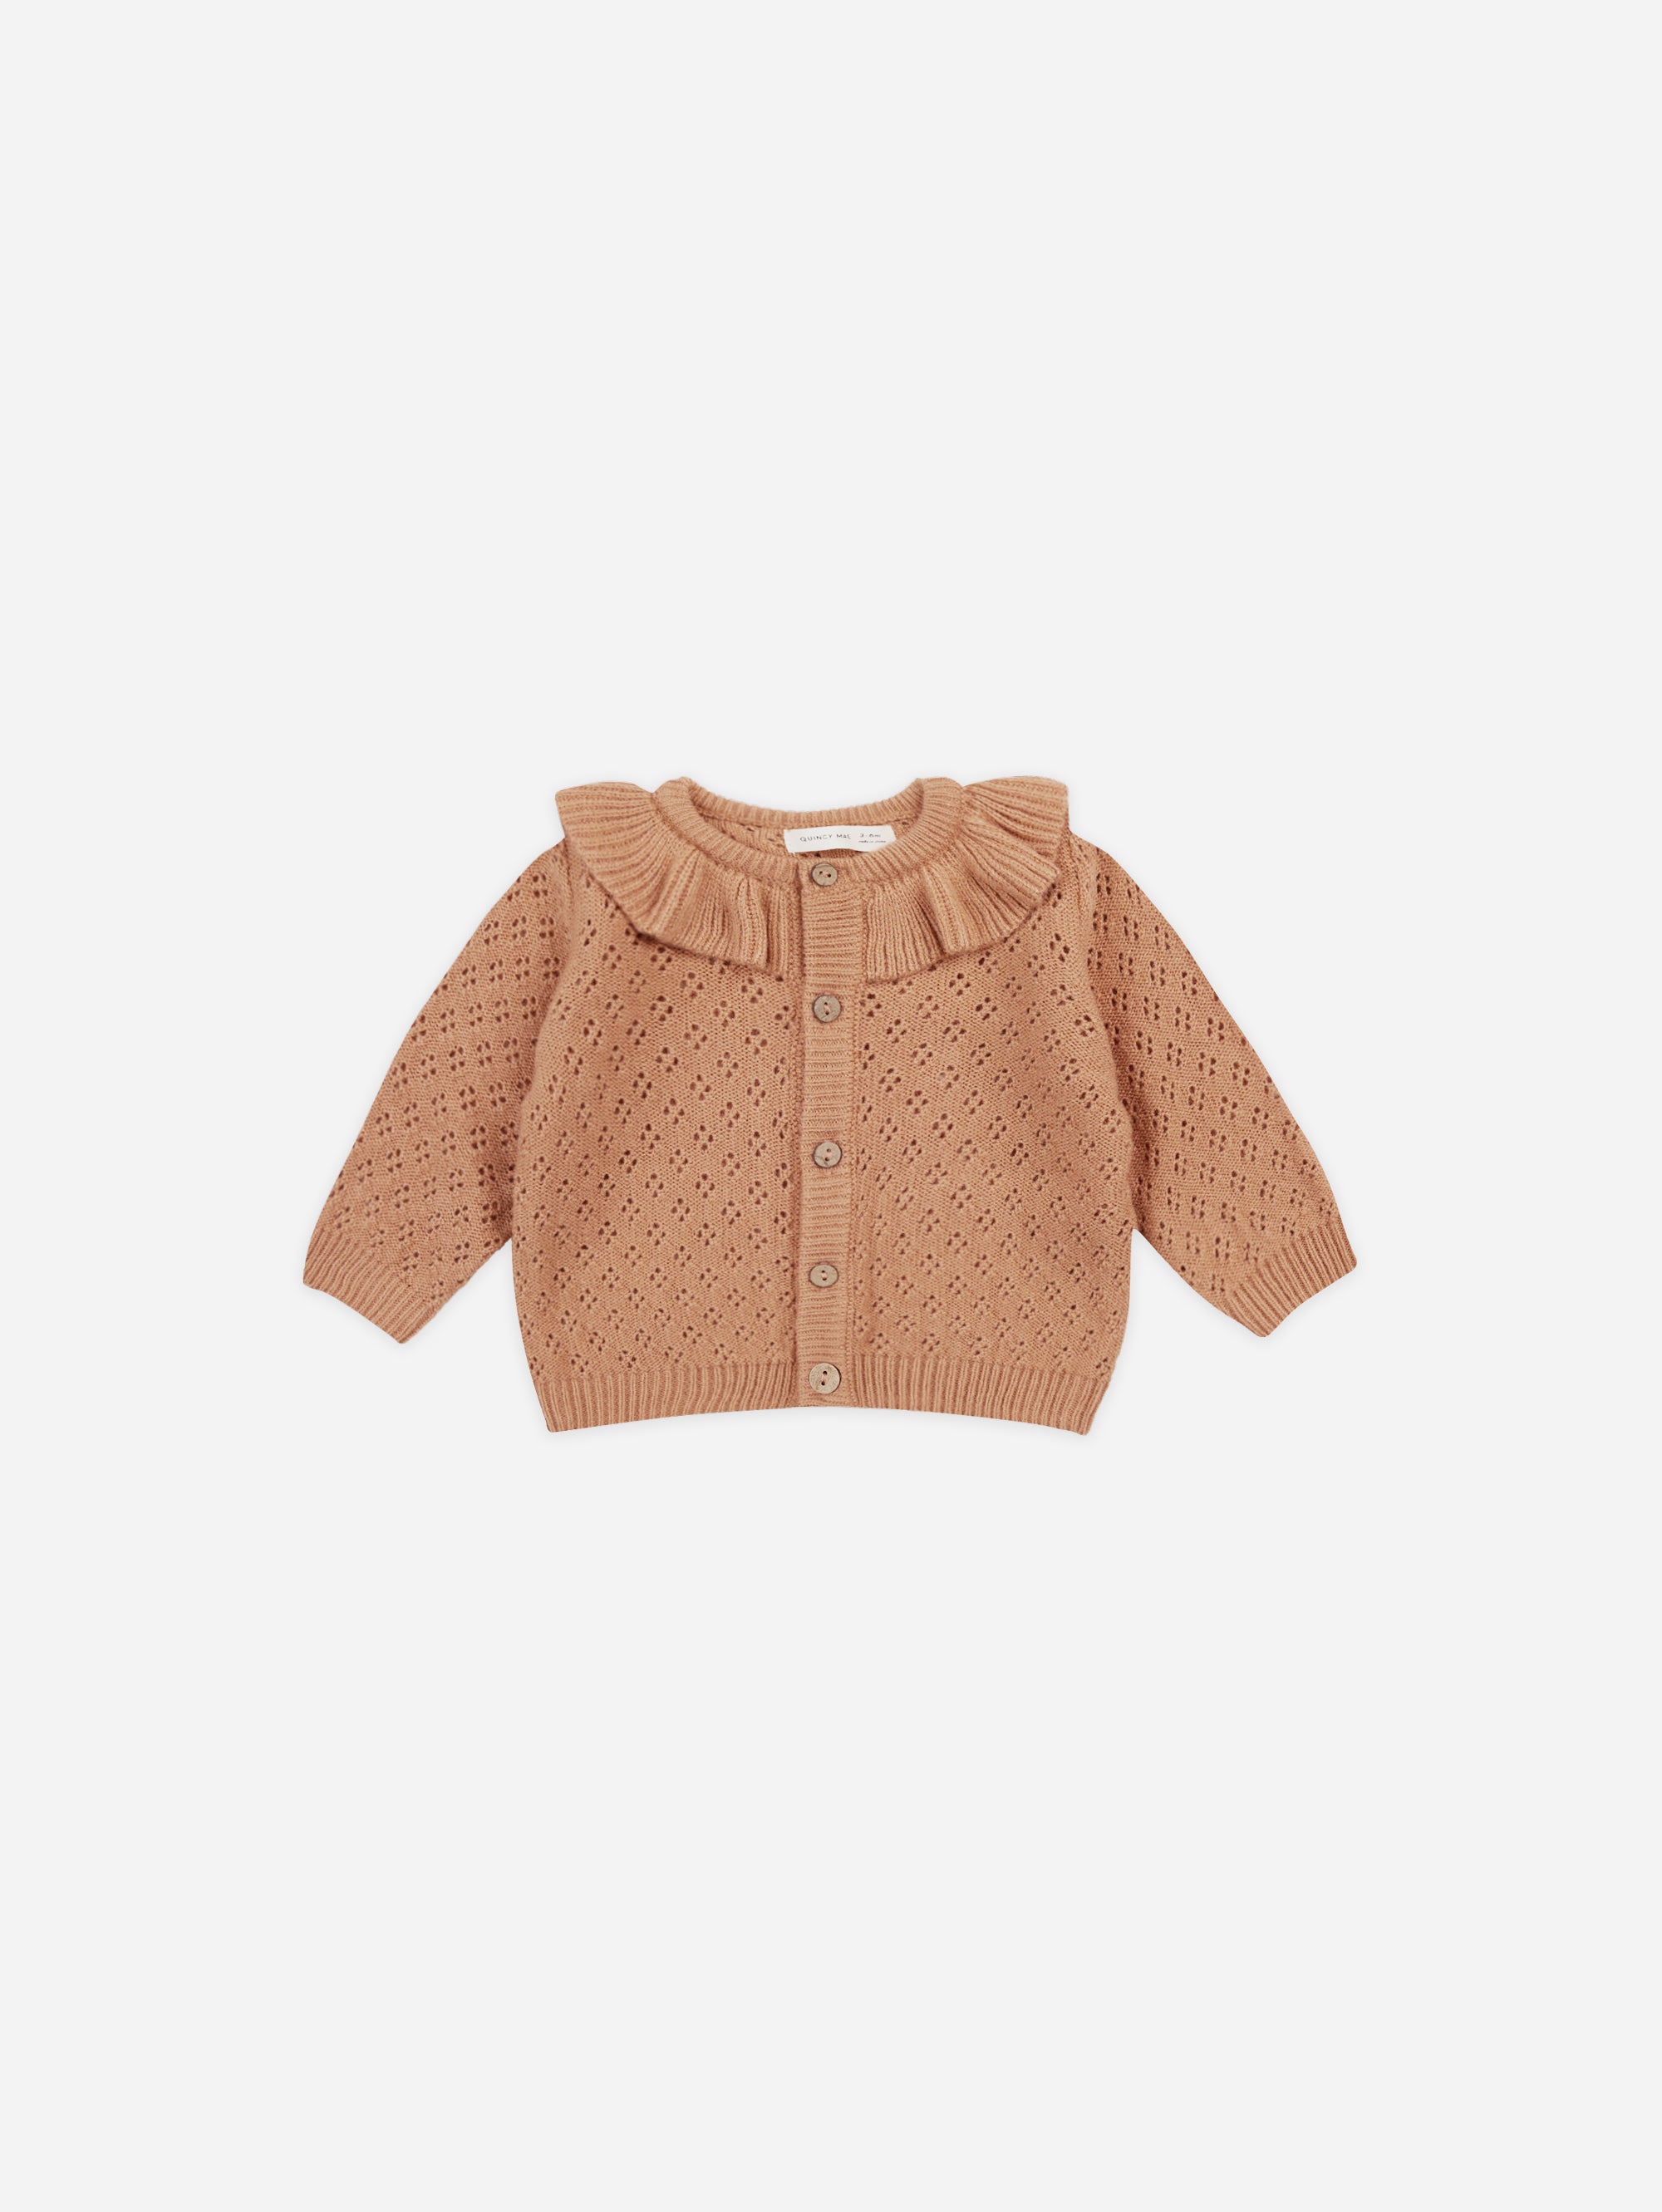 Ruffle Collar Cardigan || Melon - Rylee + Cru | Kids Clothes | Trendy Baby Clothes | Modern Infant Outfits |